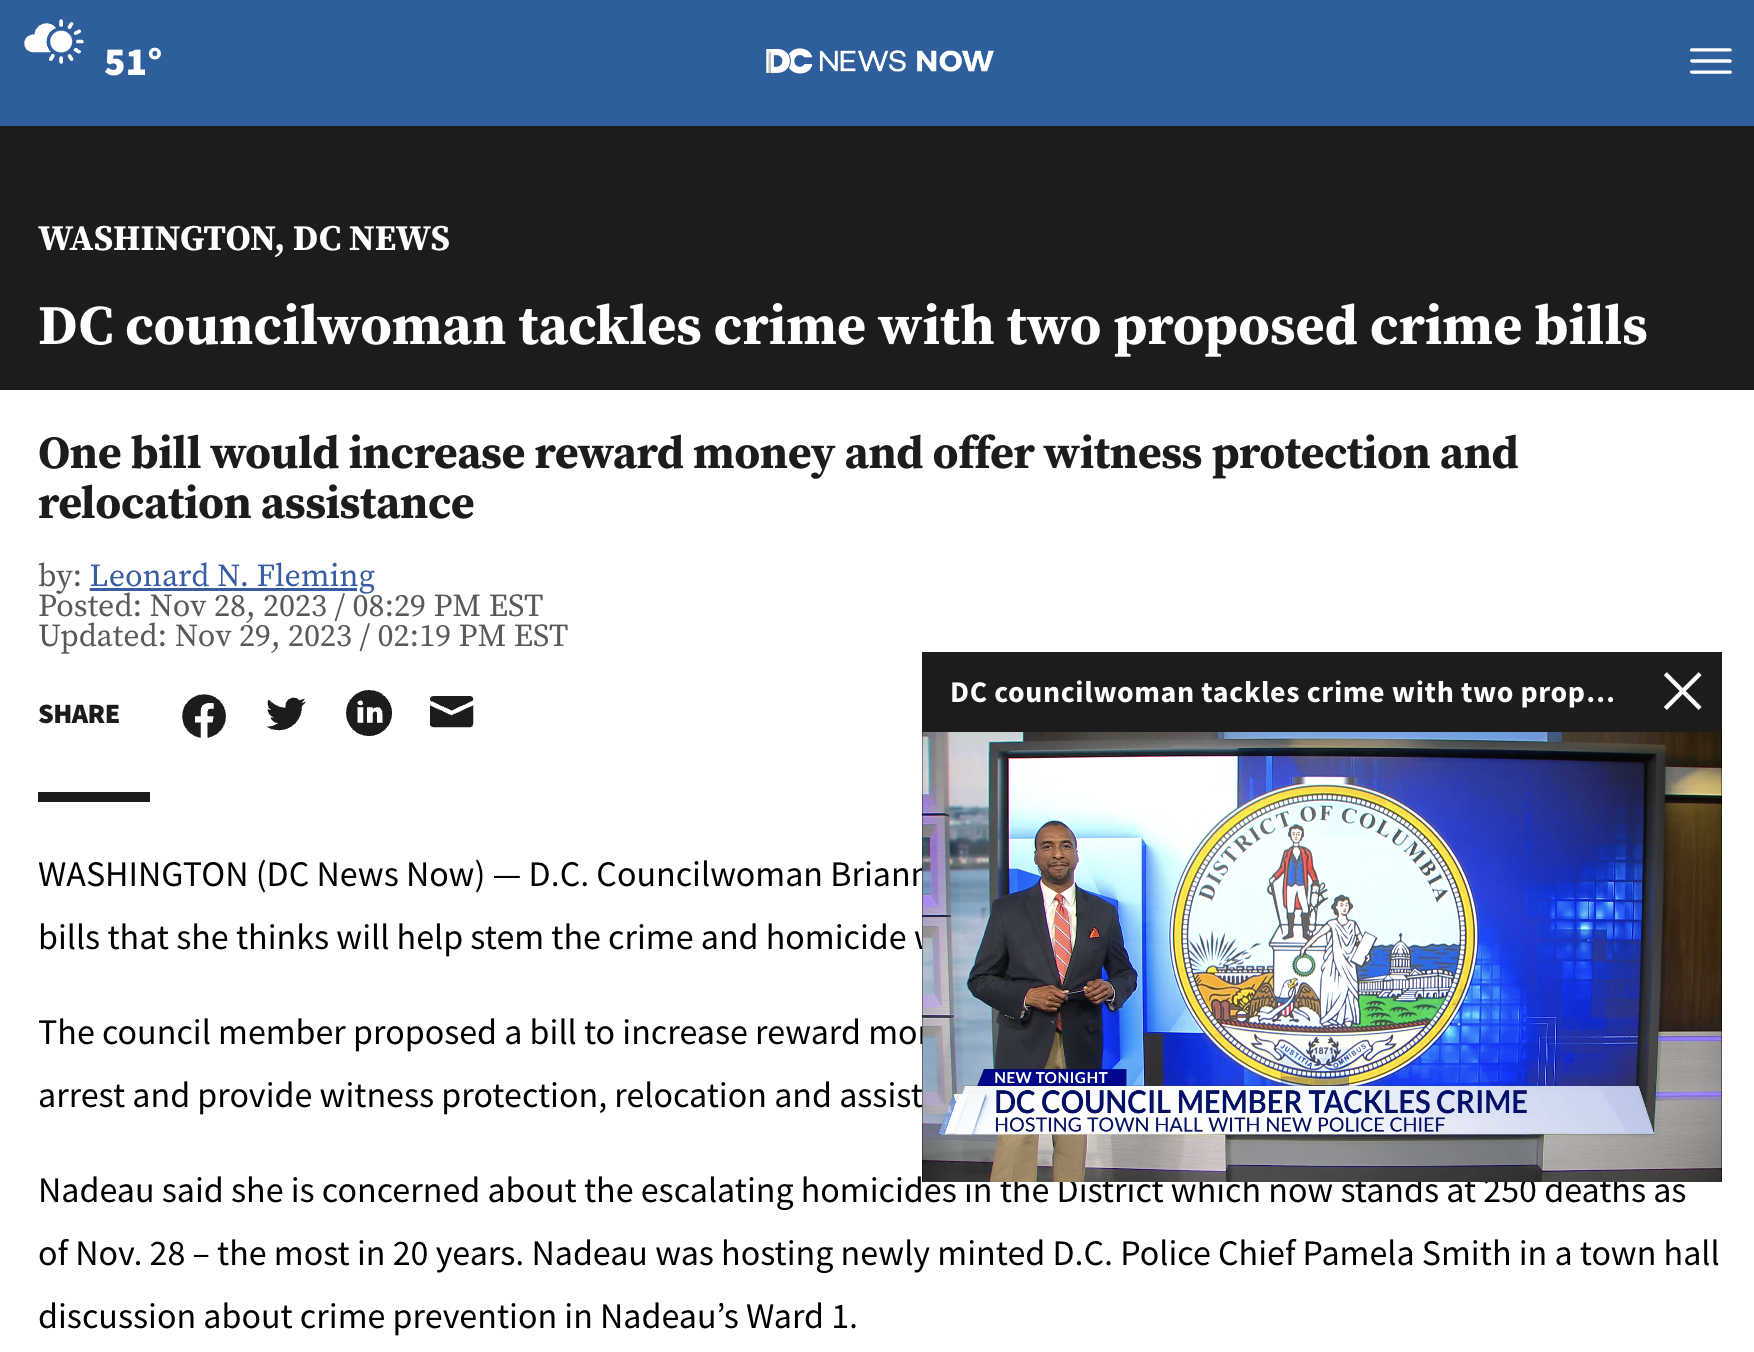 Screenshot shows headline on website: "DC councilwoman tackles crime with two proposed crime bills" from DC News Now